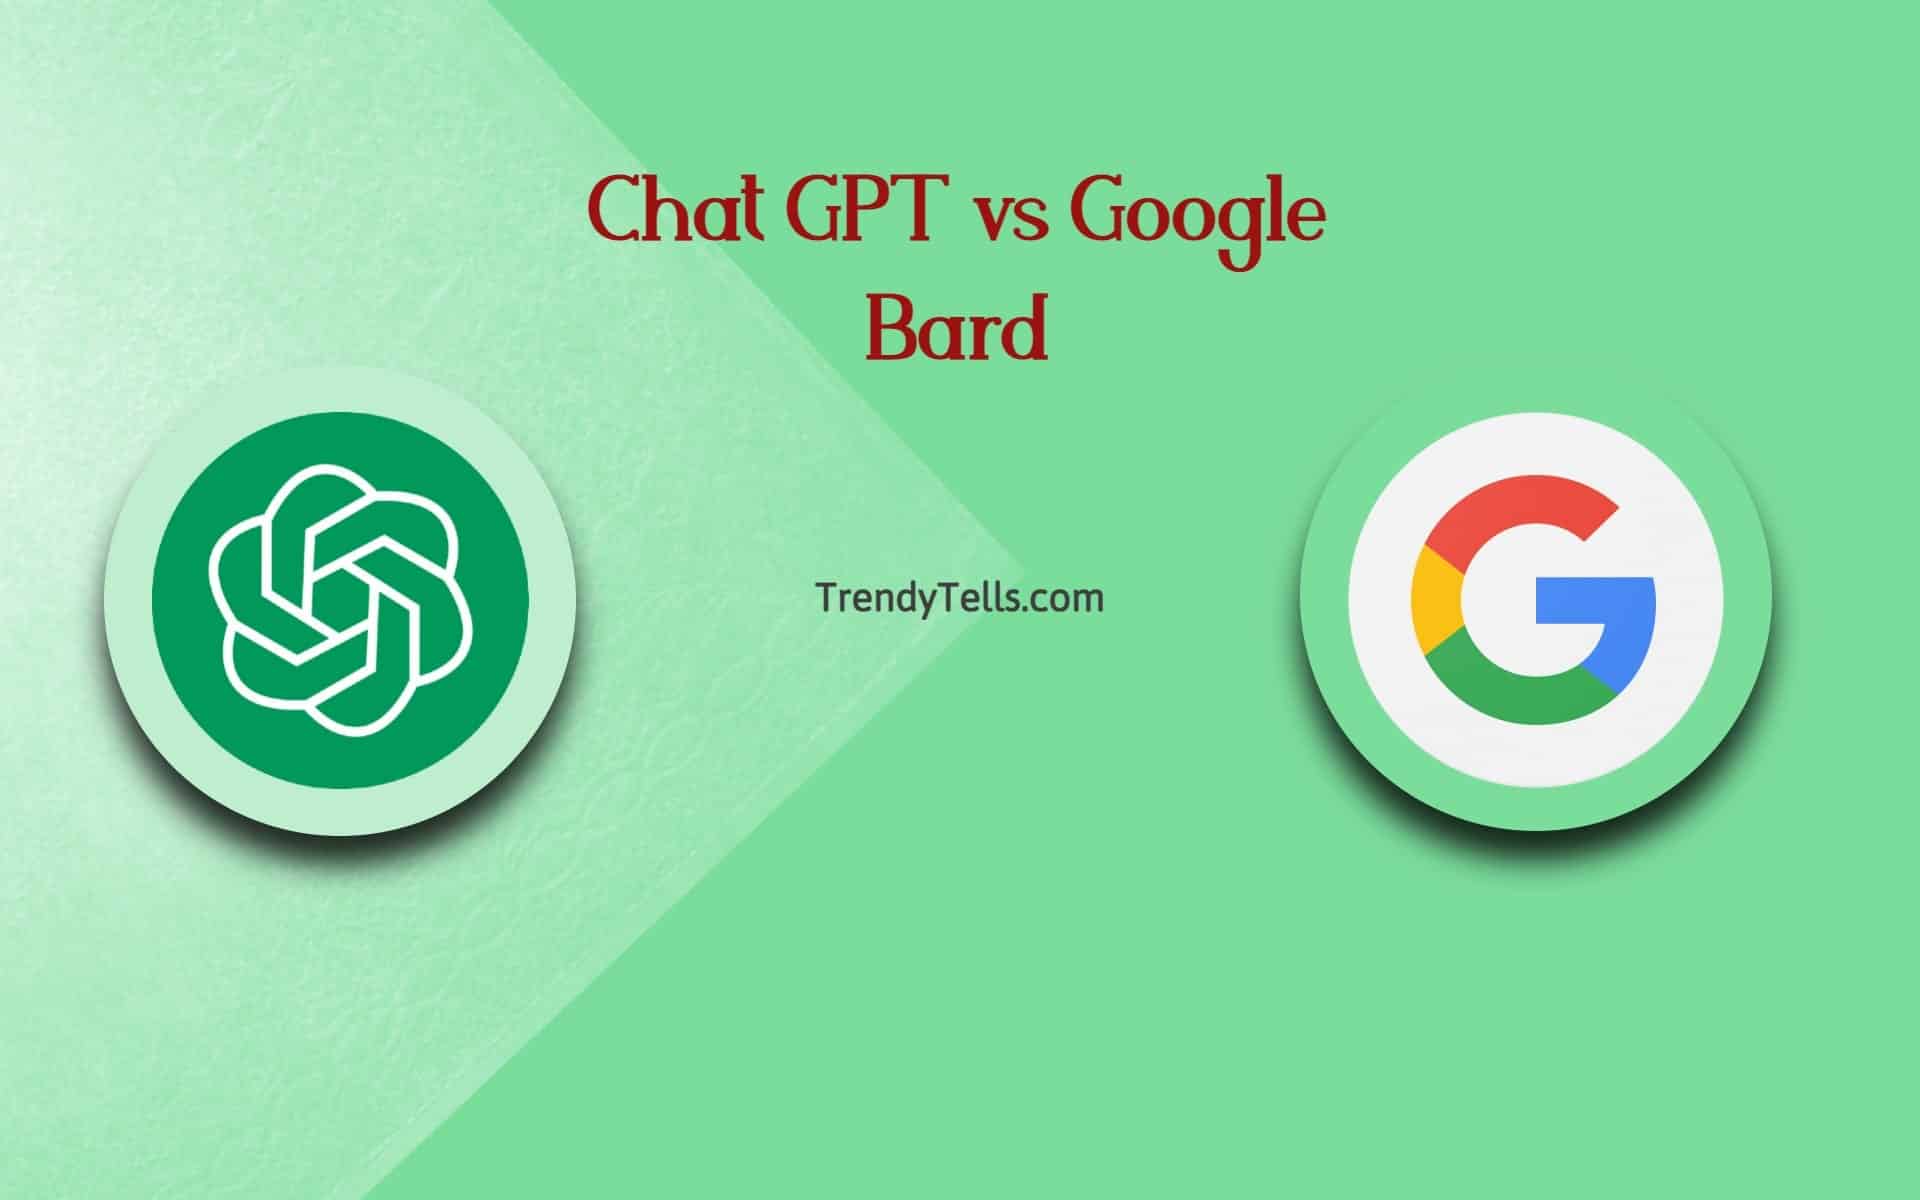 ChatGPT vs Google Bard: Which AI Chatbot is Better?